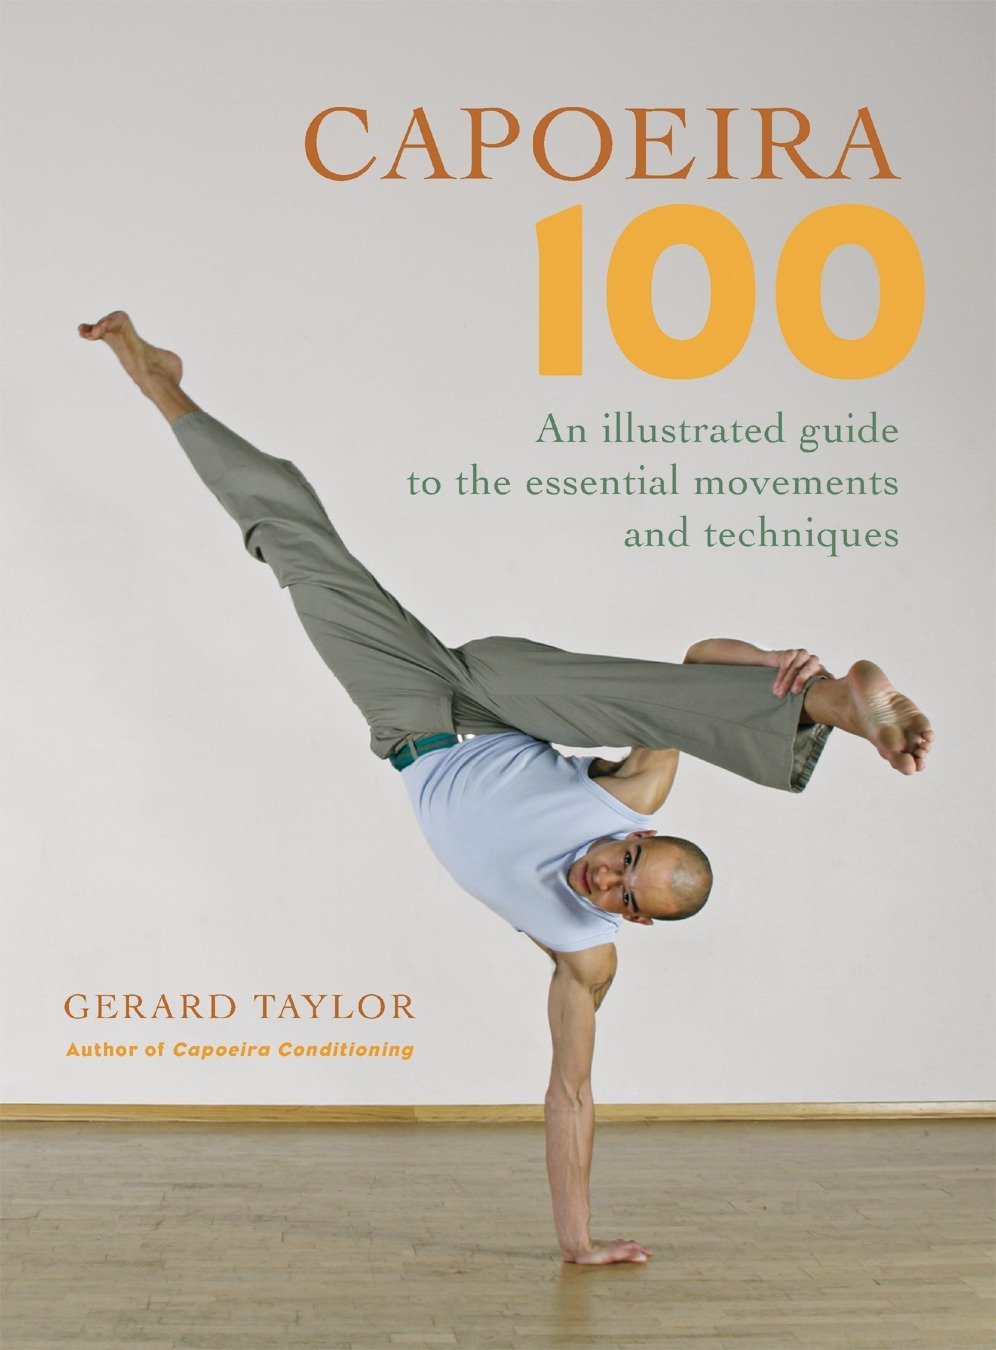 Capoeira 100: An Illustrated Guide to the Essential Movements and Techniques Book by Gerard Taylor (Preowned) - Budovideos Inc